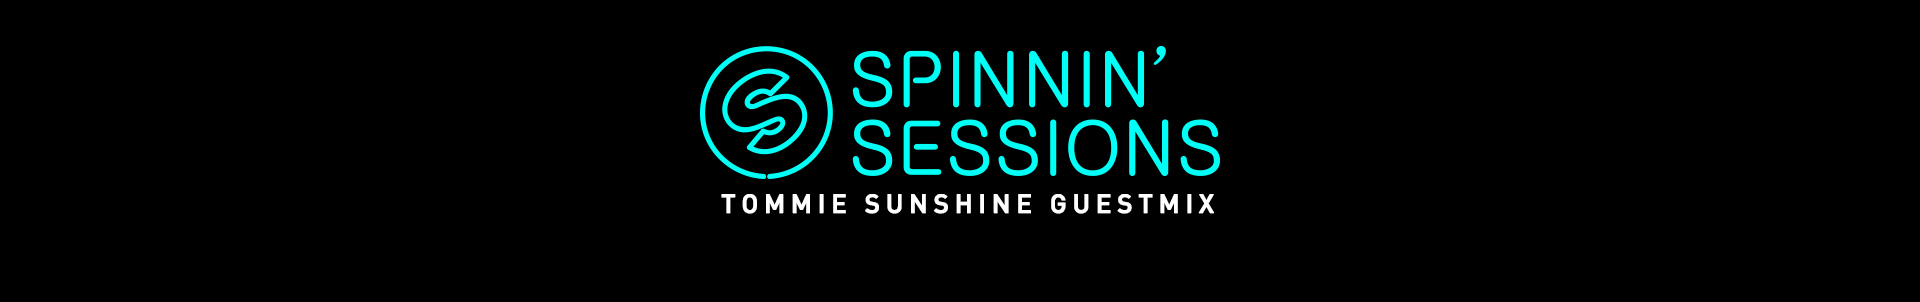 Listen to Tommie Sunshine in the mix